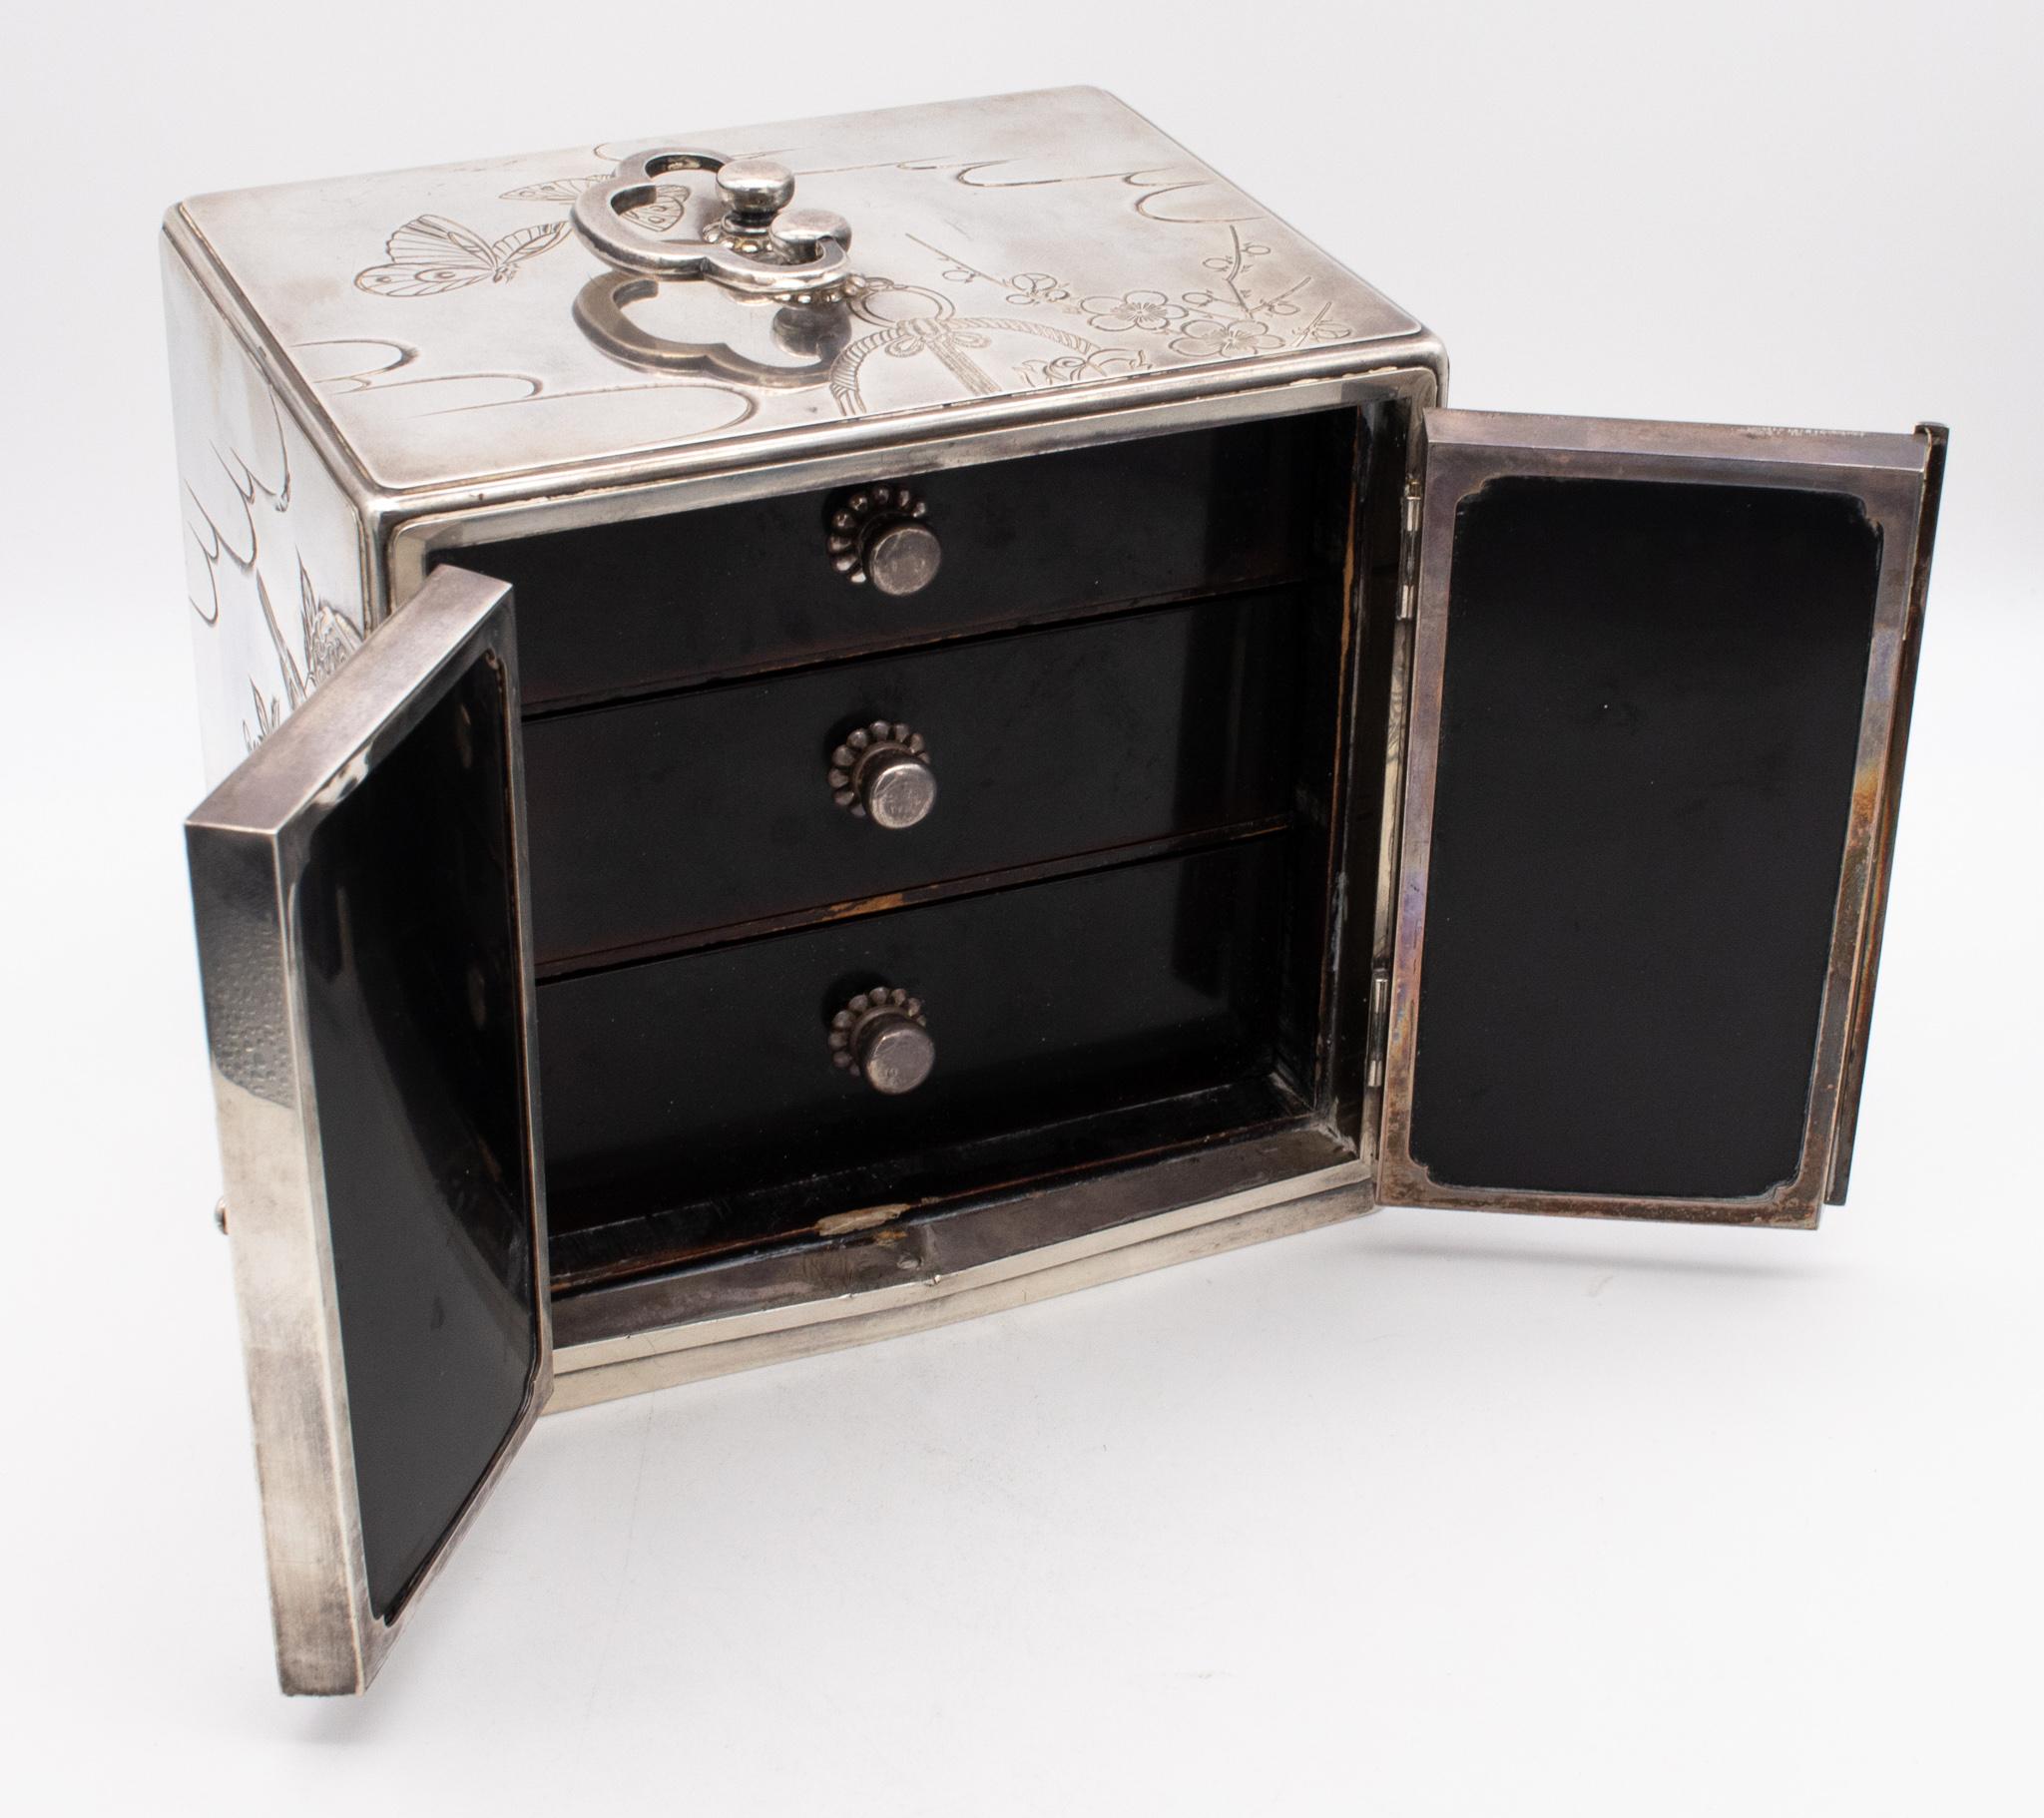 Late 19th Century Japan Meiji Period 1868-1912 Jewel Box with Compartments Drawers Sterling Silver